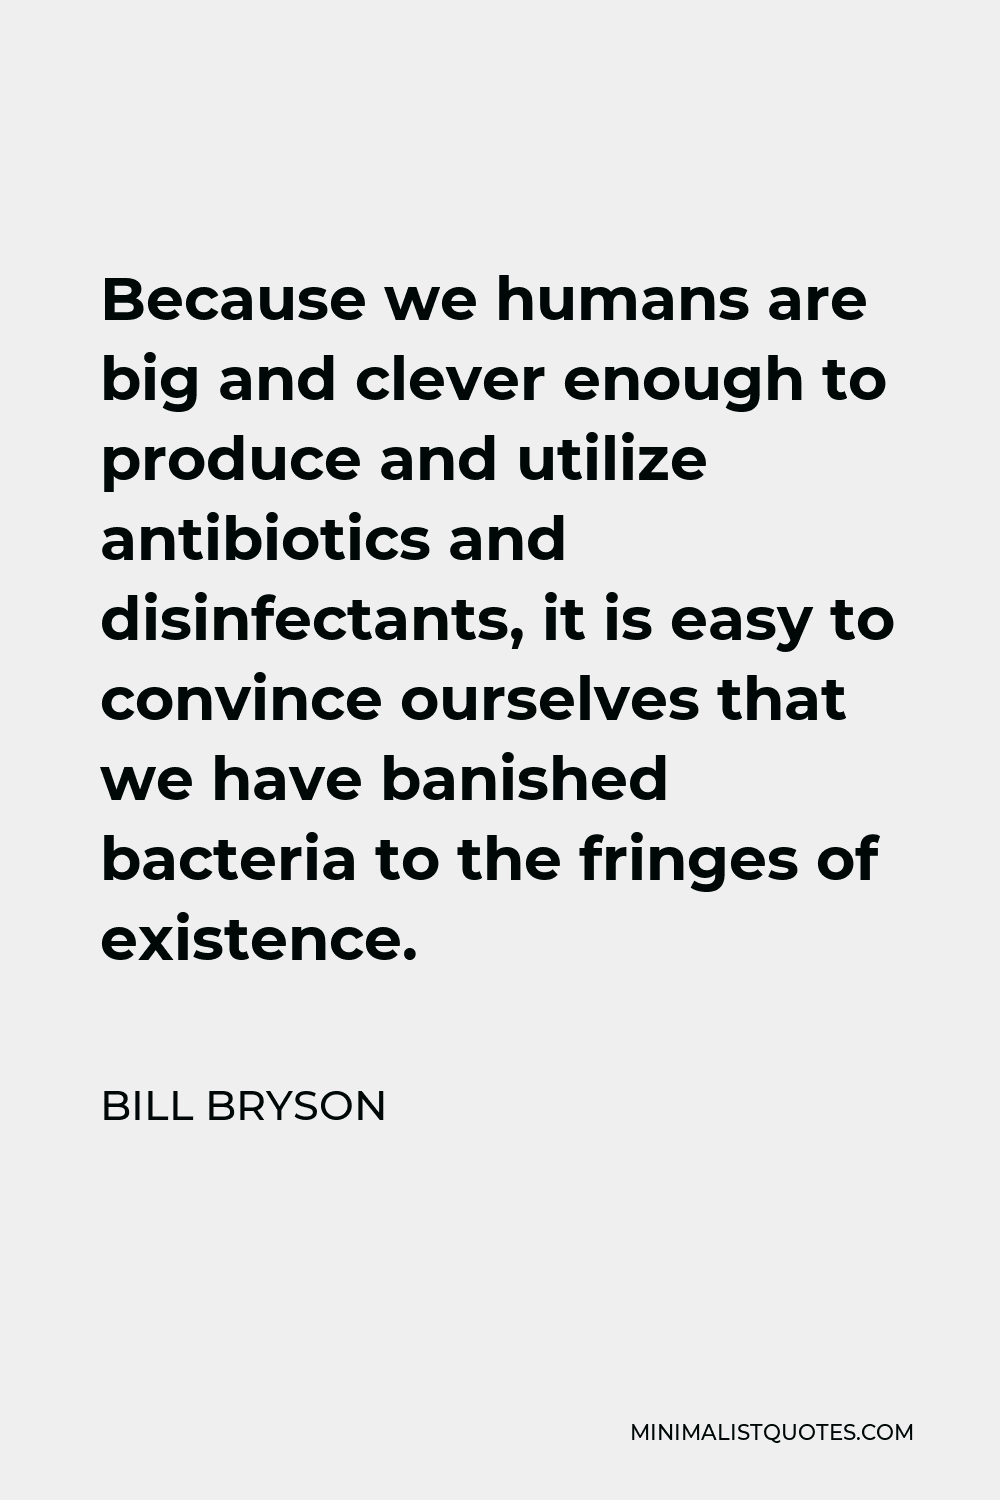 Bill Bryson Quote - Because we humans are big and clever enough to produce and utilize antibiotics and disinfectants, it is easy to convince ourselves that we have banished bacteria to the fringes of existence.